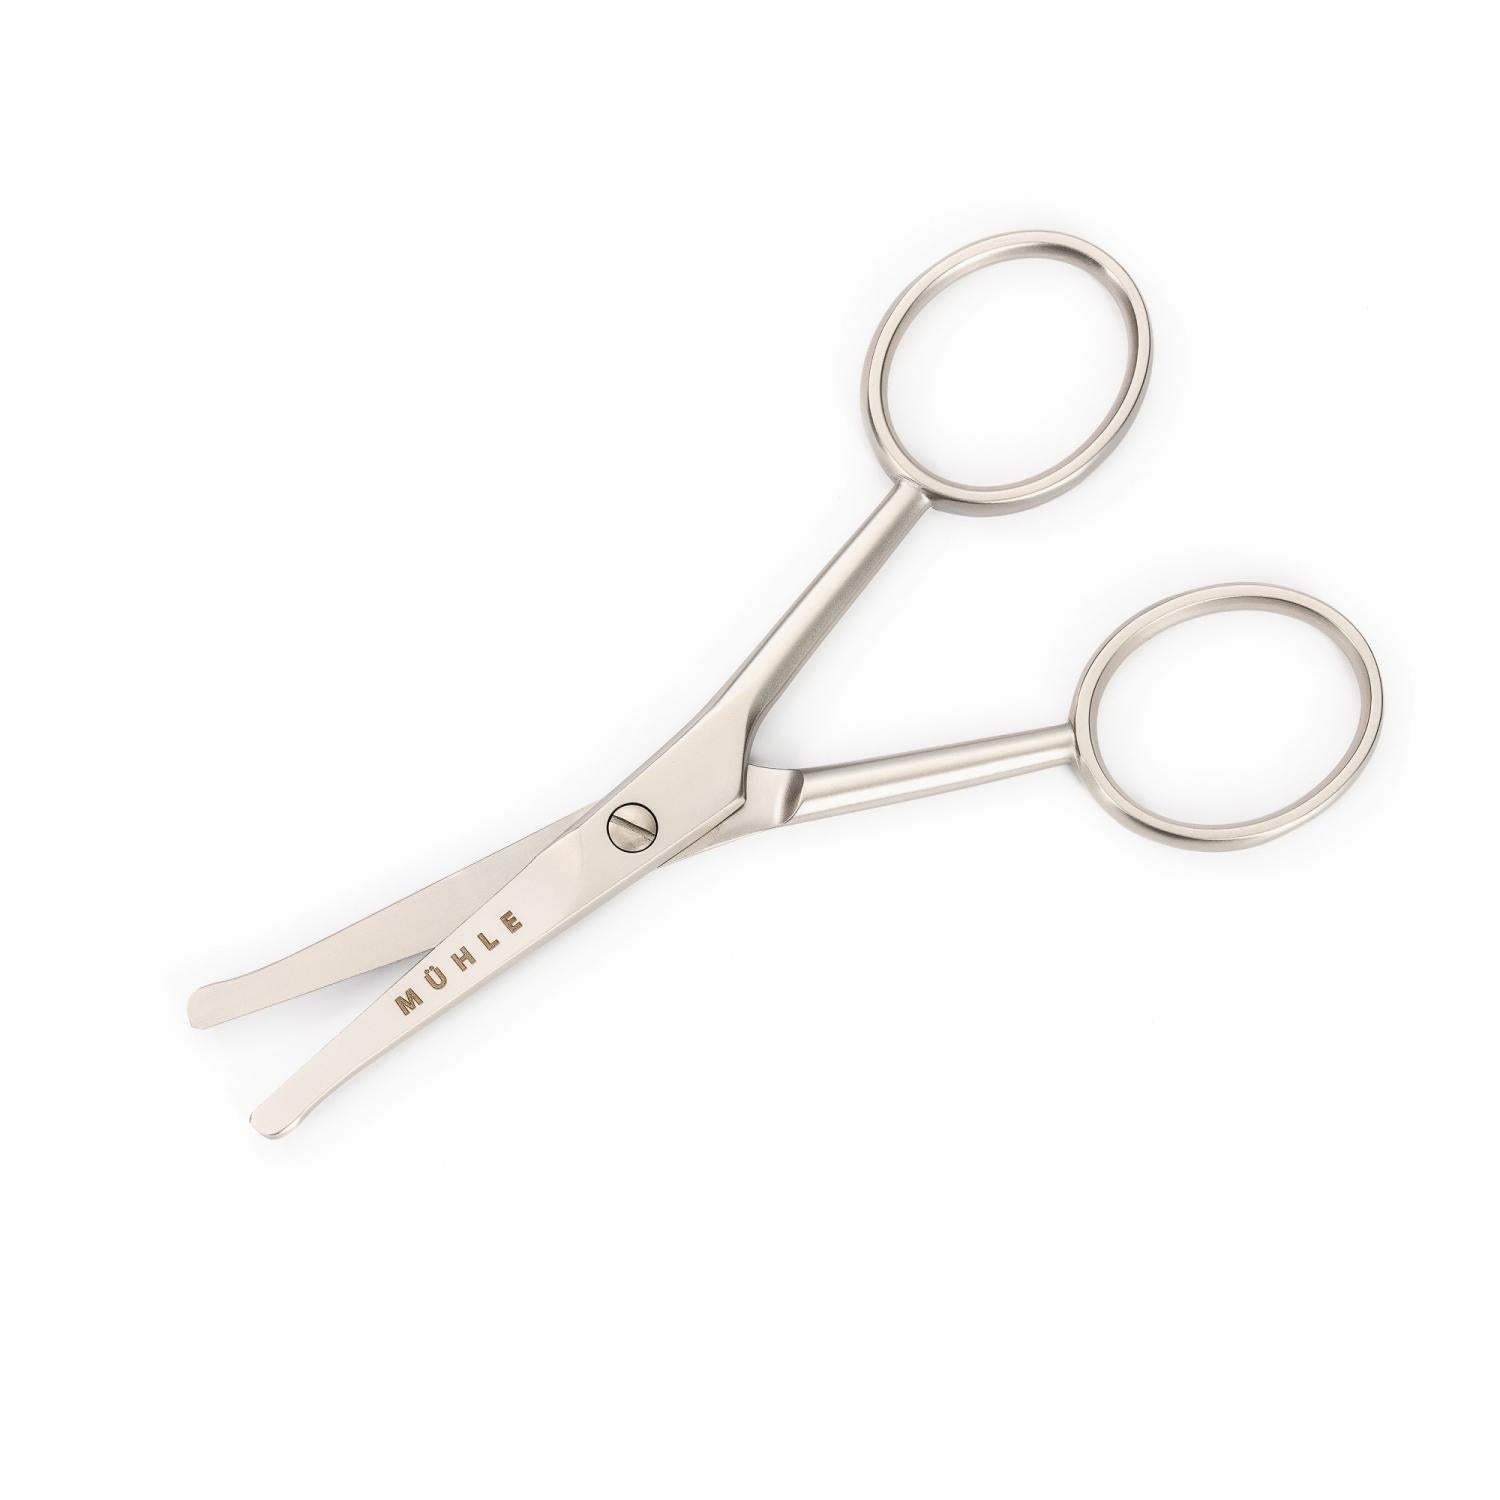 MÜHLE Scissor for Beard, Nose and Ear Hair, Open